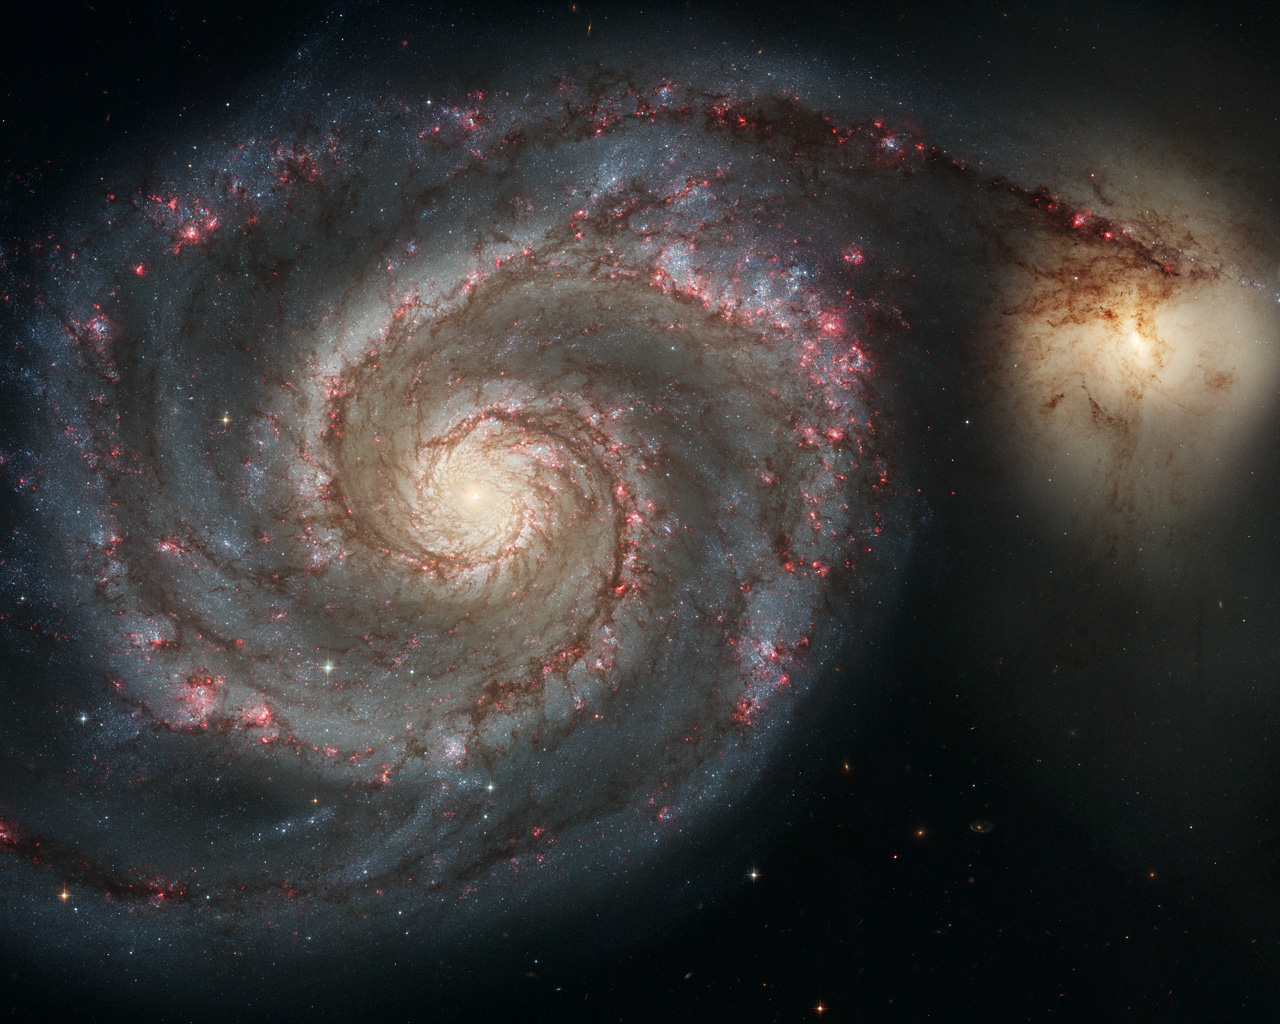 The graceful, winding arms of the majestic spiral galaxy M51 (NGC 5194) appear like a grand spiral staircase sweeping through space. They are actually long lanes of stars and gas laced with dust. This sharpest-ever image, taken in January 2005 with the Advanced Camera for Surveys aboard the NASA/ESA Hubble Space Telescope, illustrates a spiral galaxy's grand design, from its curving spiral arms, where young stars reside, to its yellowish central core, a home of older stars. The galaxy is nicknamed the Whirlpool because of its swirling structure. The Whirlpool's most striking feature is its two curving arms, a hallmark of so-called grand-design spiral galaxies. Many spiral galaxies possess numerous, loosely shaped arms that make their spiral structure less pronounced. These arms serve an important purpose in spiral galaxies. They are star-formation factories, compressing hydrogen gas and creating clusters of new stars. In the Whirlpool, the assembly line begins with the dark clouds of gas on the inner edge, then moves to bright pink star-forming regions, and ends with the brilliant blue star clusters along the outer edge. Some astronomers believe that the Whirlpool's arms are so prominent because of the effects of a close encounter with NGC 5195, the small, yellowish galaxy at the outermost tip of one of the Whirlpool's arms. At first glance, the compact galaxy appears to be tugging on the arm. Hubble's clear view, however, shows that NGC 5195 is passing behind the Whirlpool. The small galaxy has been gliding past the Whirlpool for hundreds of millions of years. As NGC 5195 drifts by, its gravitational muscle pumps up waves within the Whirlpool's pancake-shaped disk. The waves are like ripples in a pond generated when a rock is thrown in the water. When the waves pass through orbiting gas clouds within the disk, they squeeze the gaseous material along each arm's inner edge. The dark dusty material looks like gathering storm clouds. These dense clouds collapse, creati